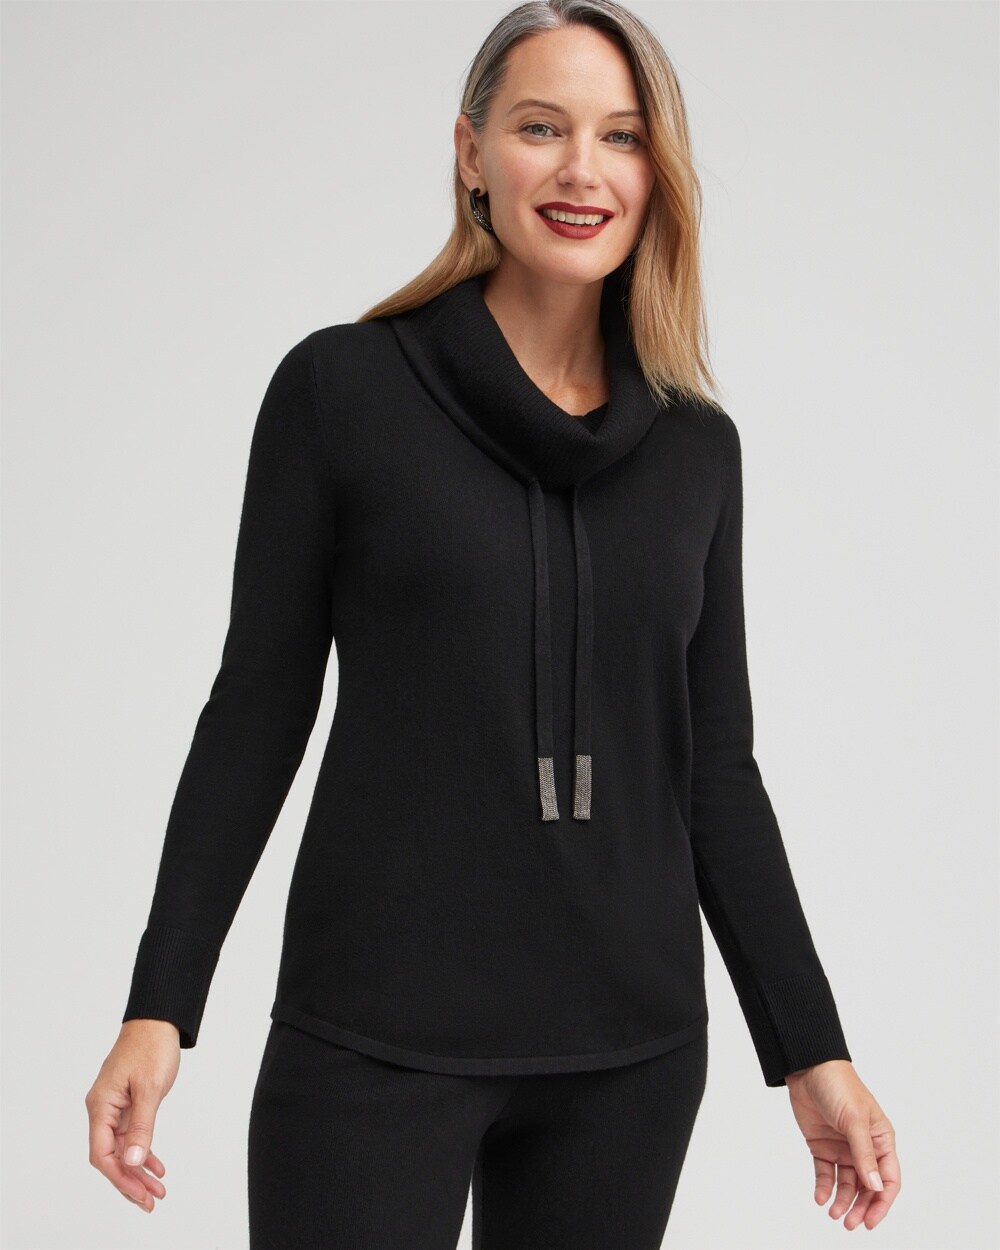 Zenergy Luxe® Cashmere Blend Cowl Sweater